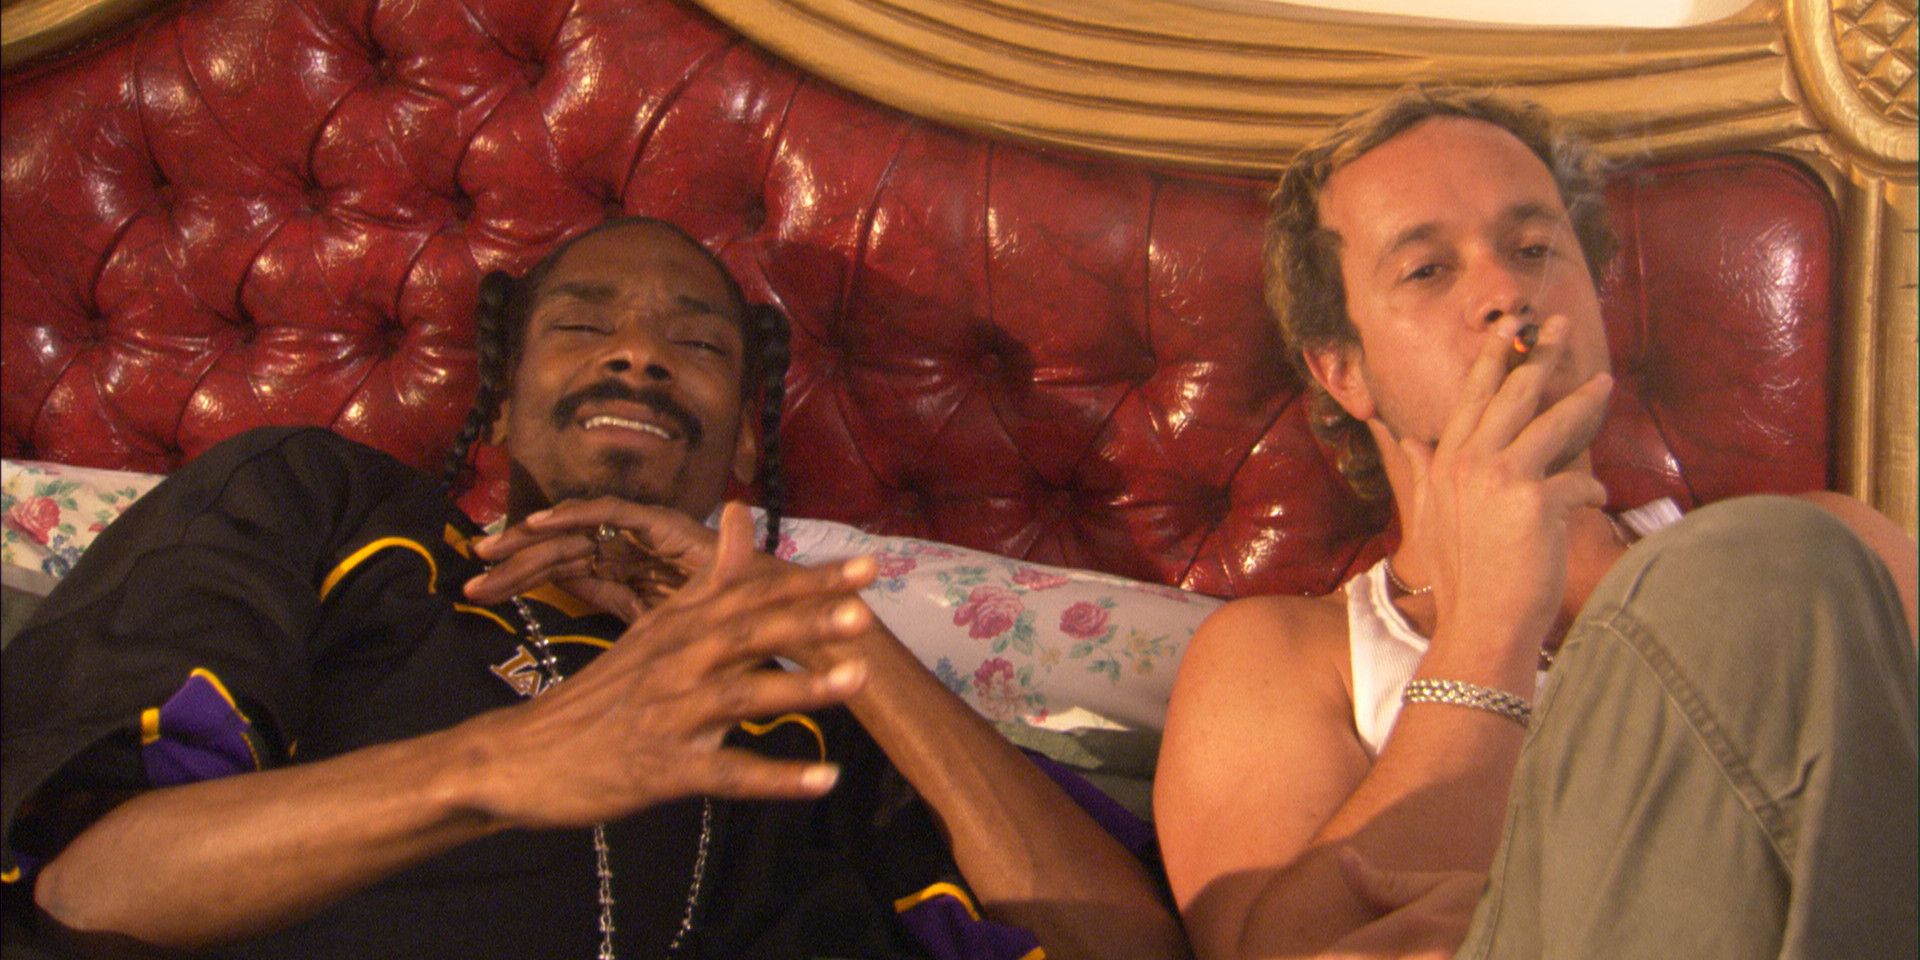 Snoop Dogg and Pauly Shore in Pauly Shore Is Dead